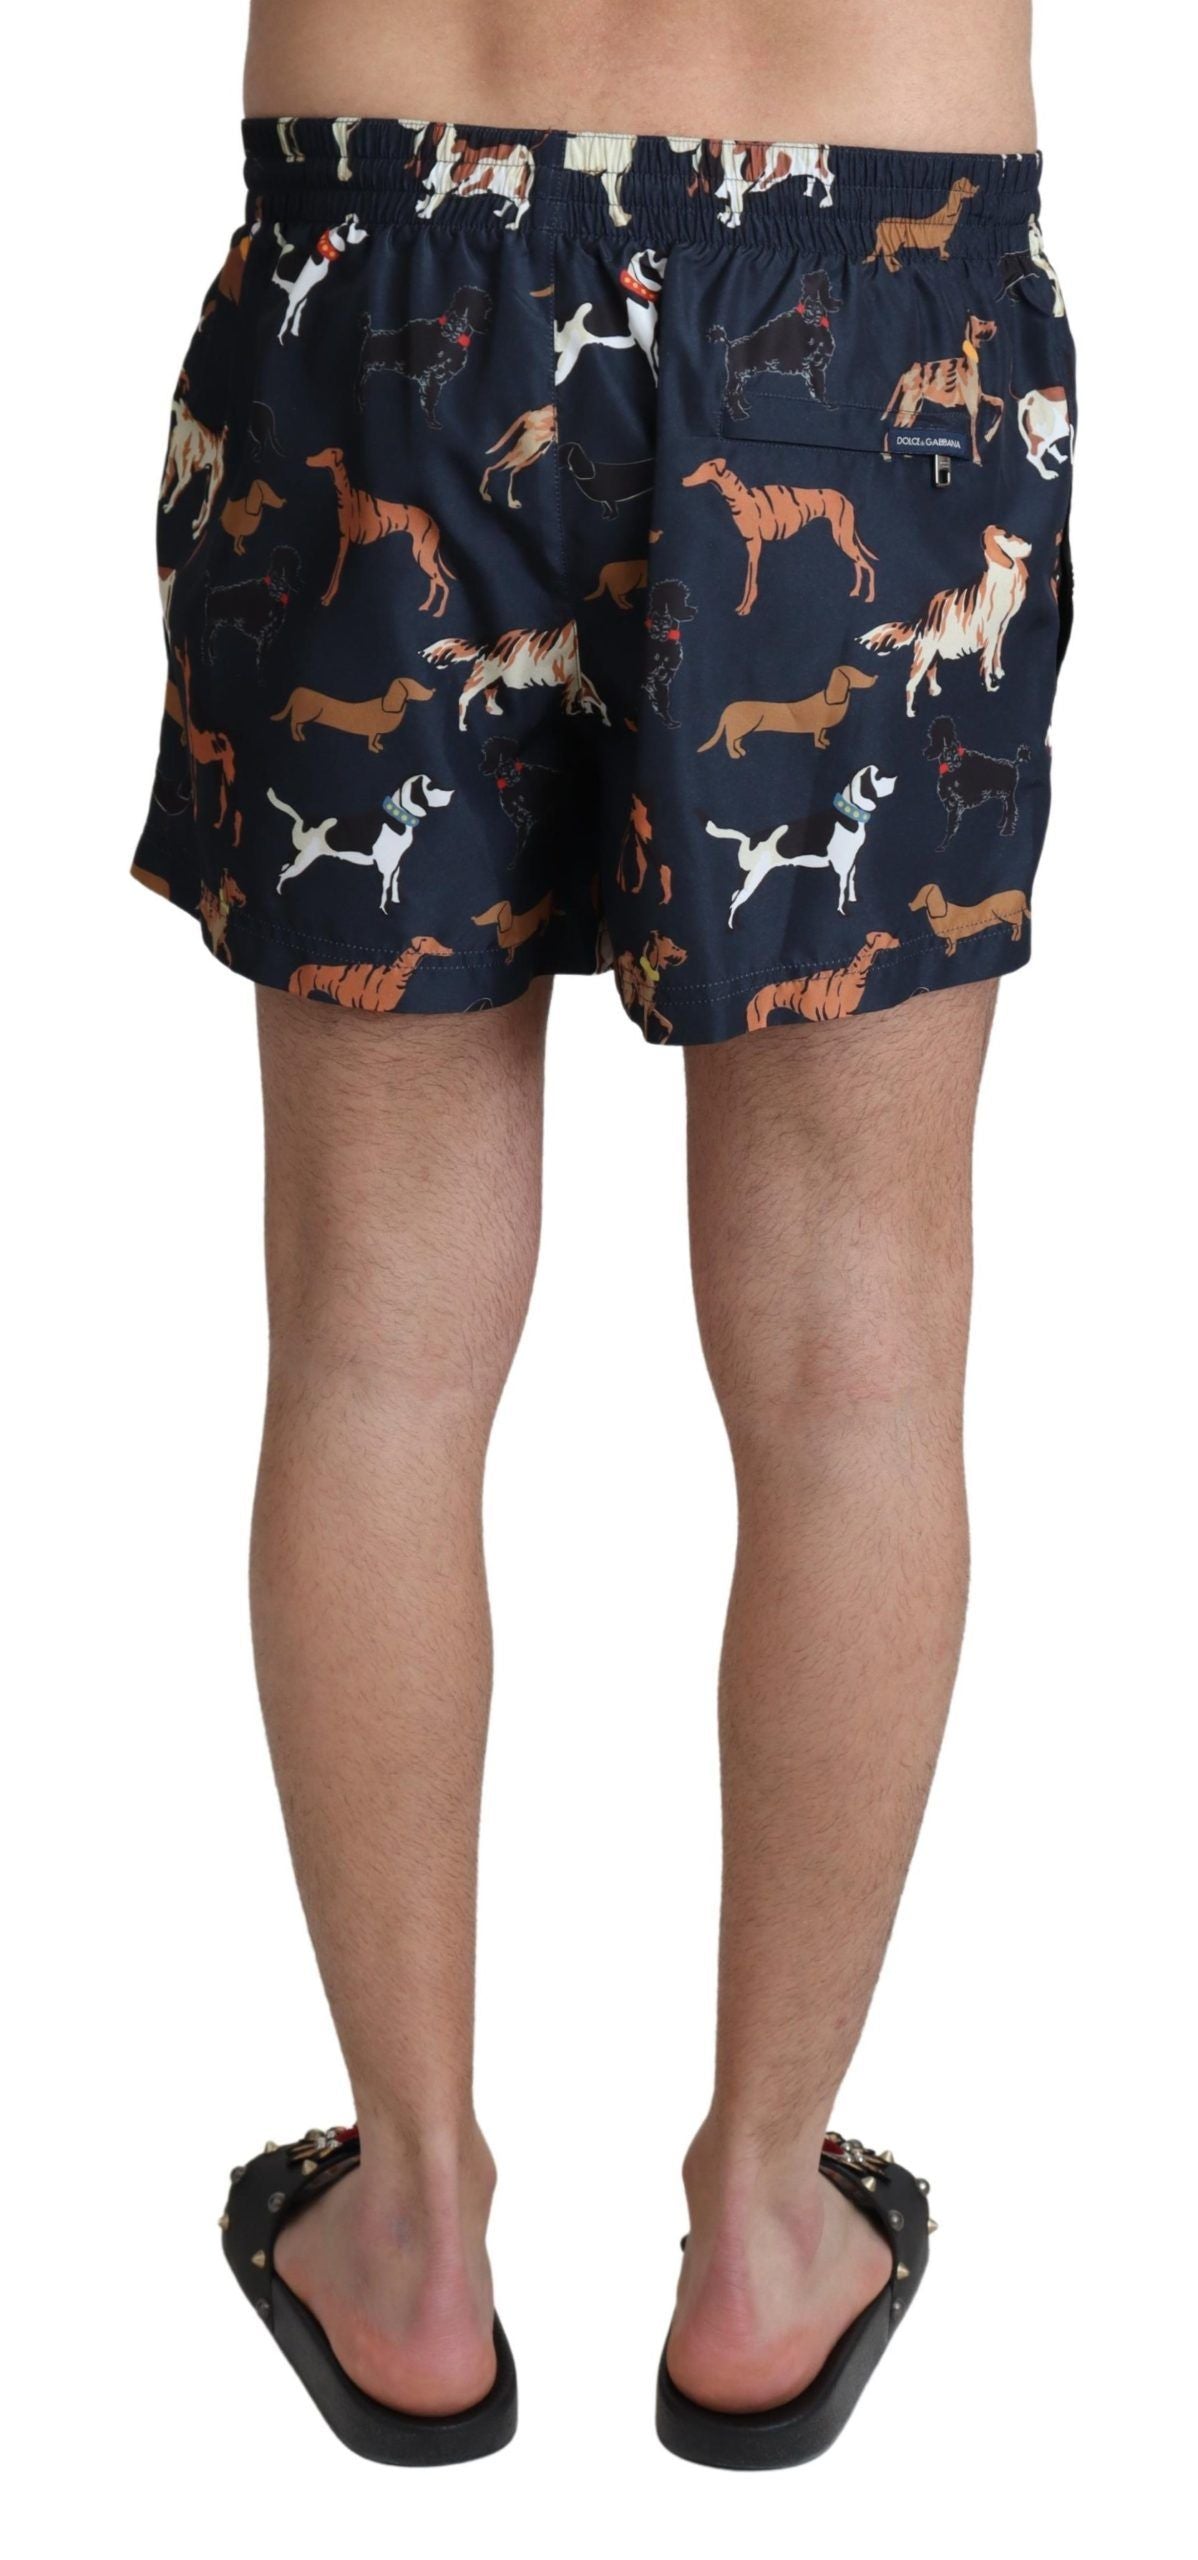 Blue Dog Print Beachwear Shorts Men Swimwear - Designed by Dolce & Gabbana Available to Buy at a Discounted Price on Moon Behind The Hill Online Designer Discount Store